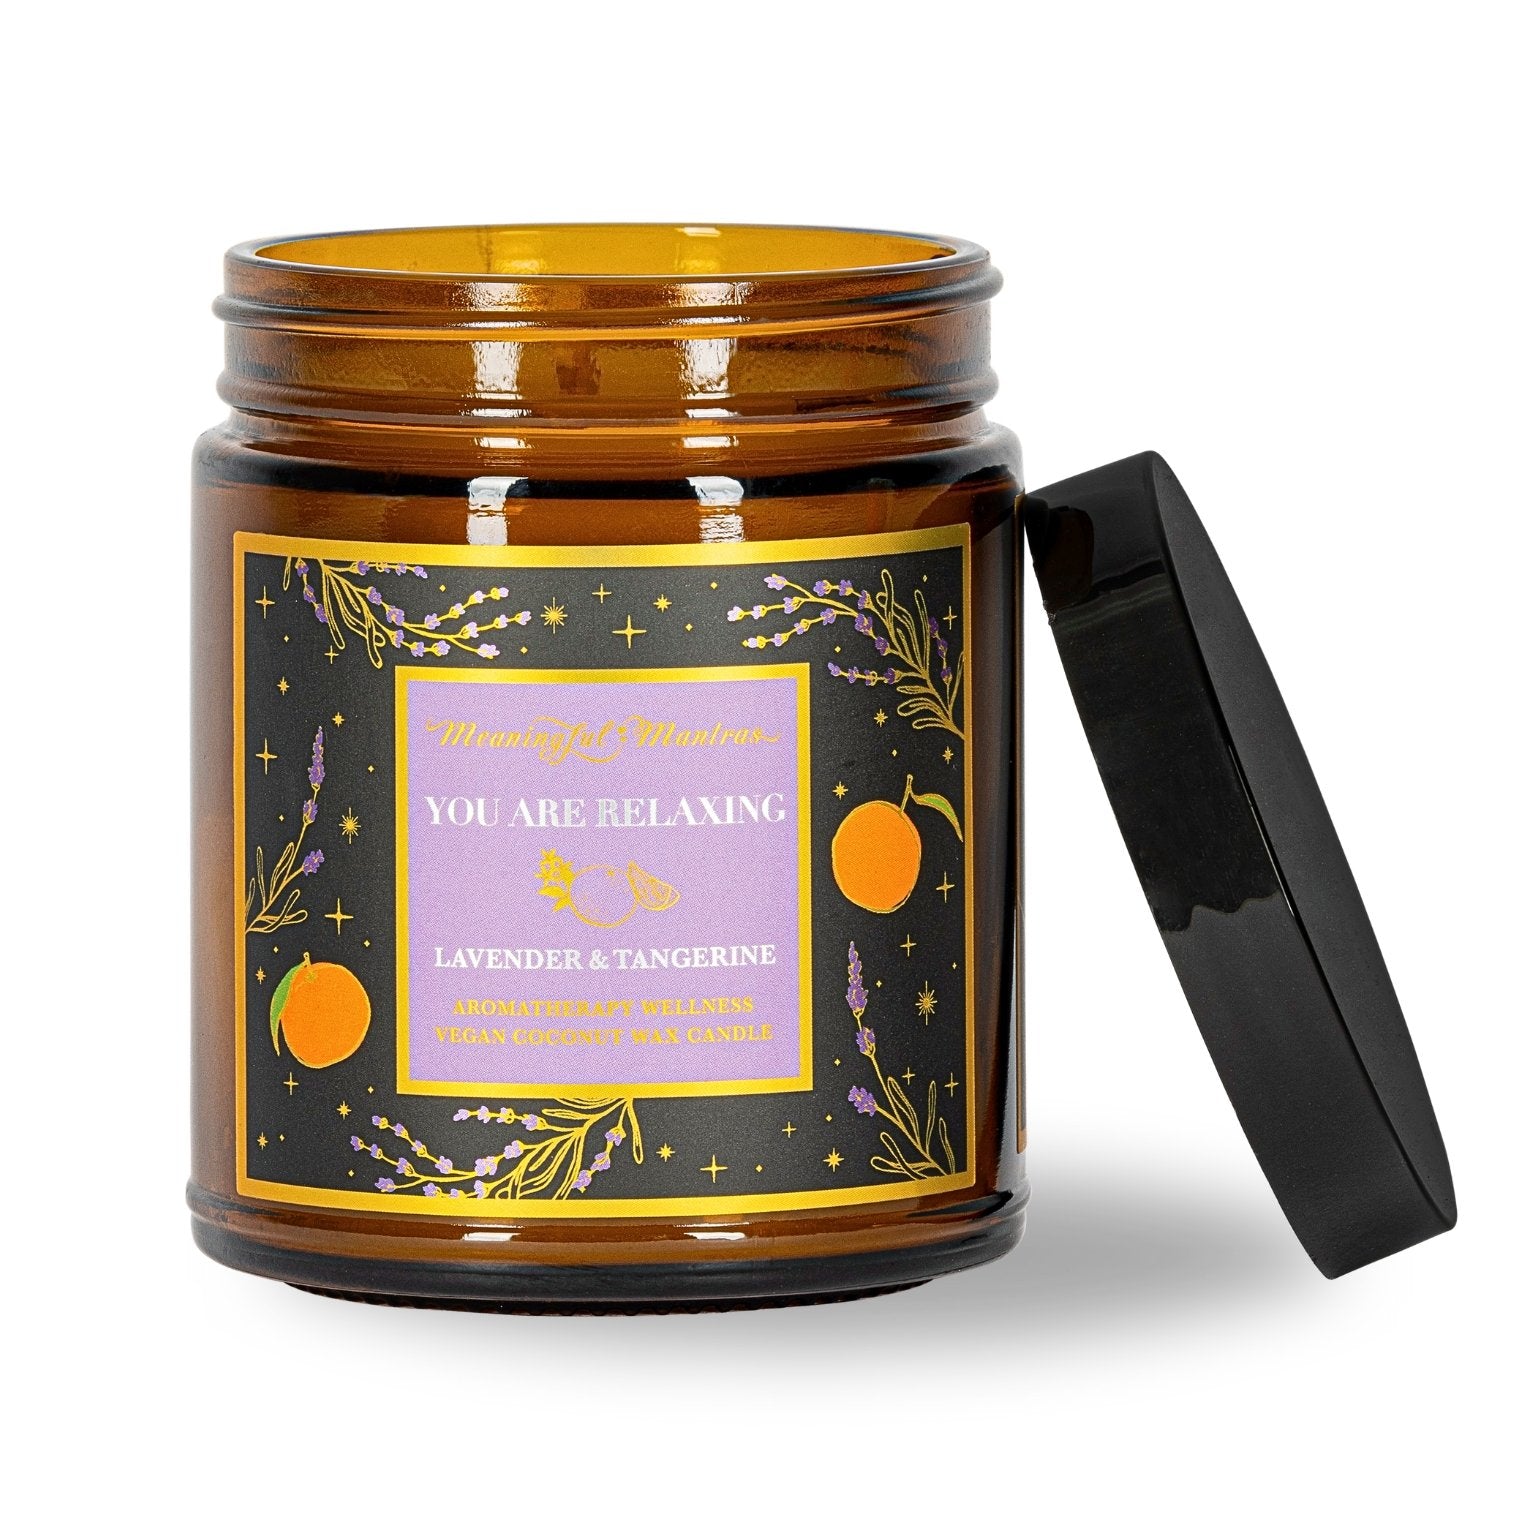 You Are Relaxing Lavender & Tangerine Candle